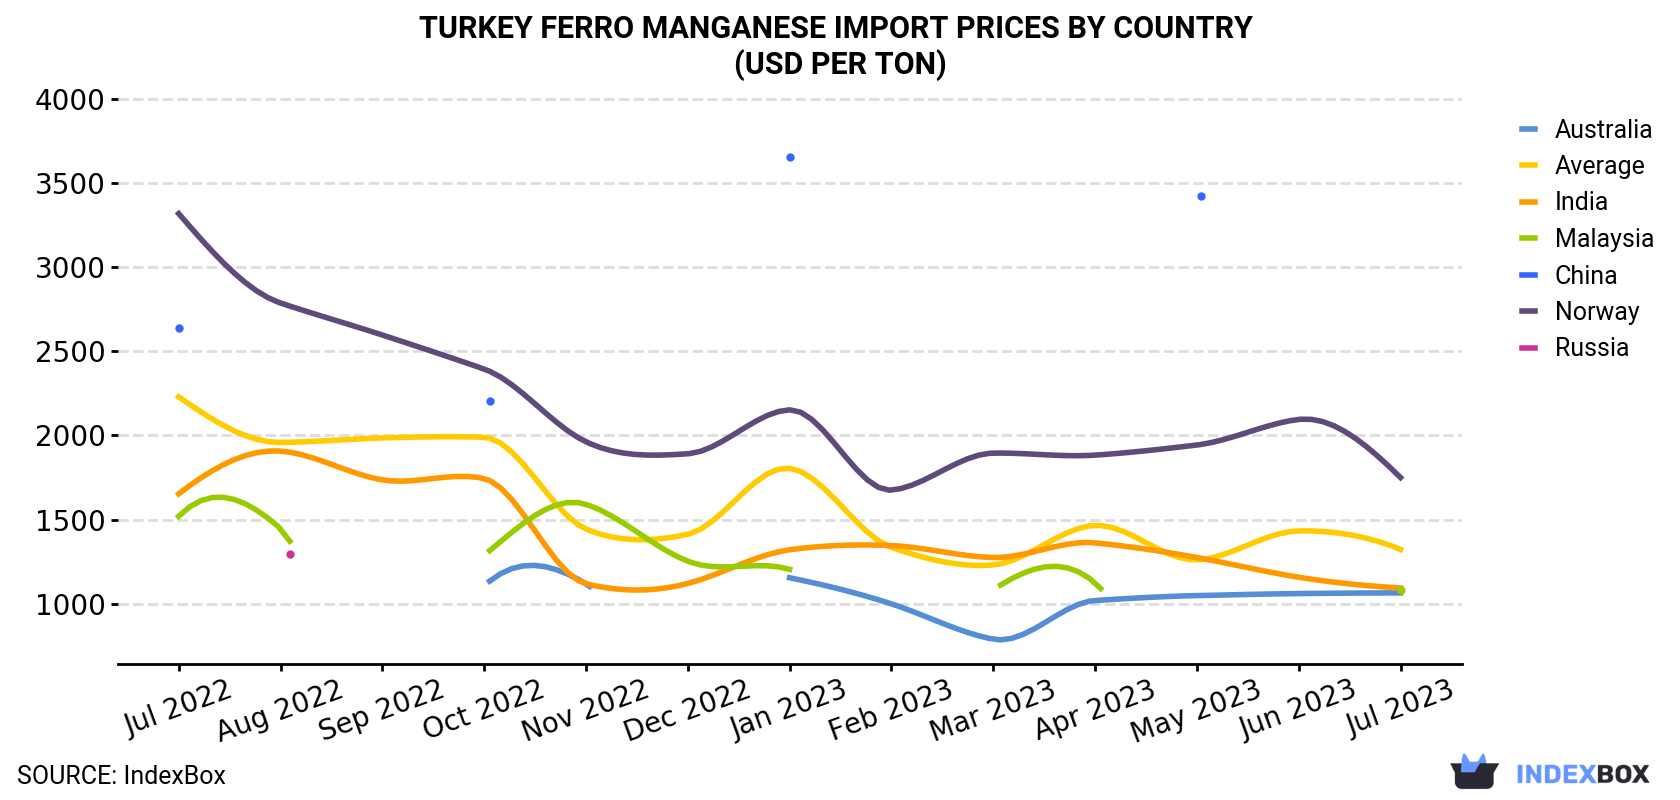 Turkey Ferro Manganese Import Prices By Country (USD Per Ton)